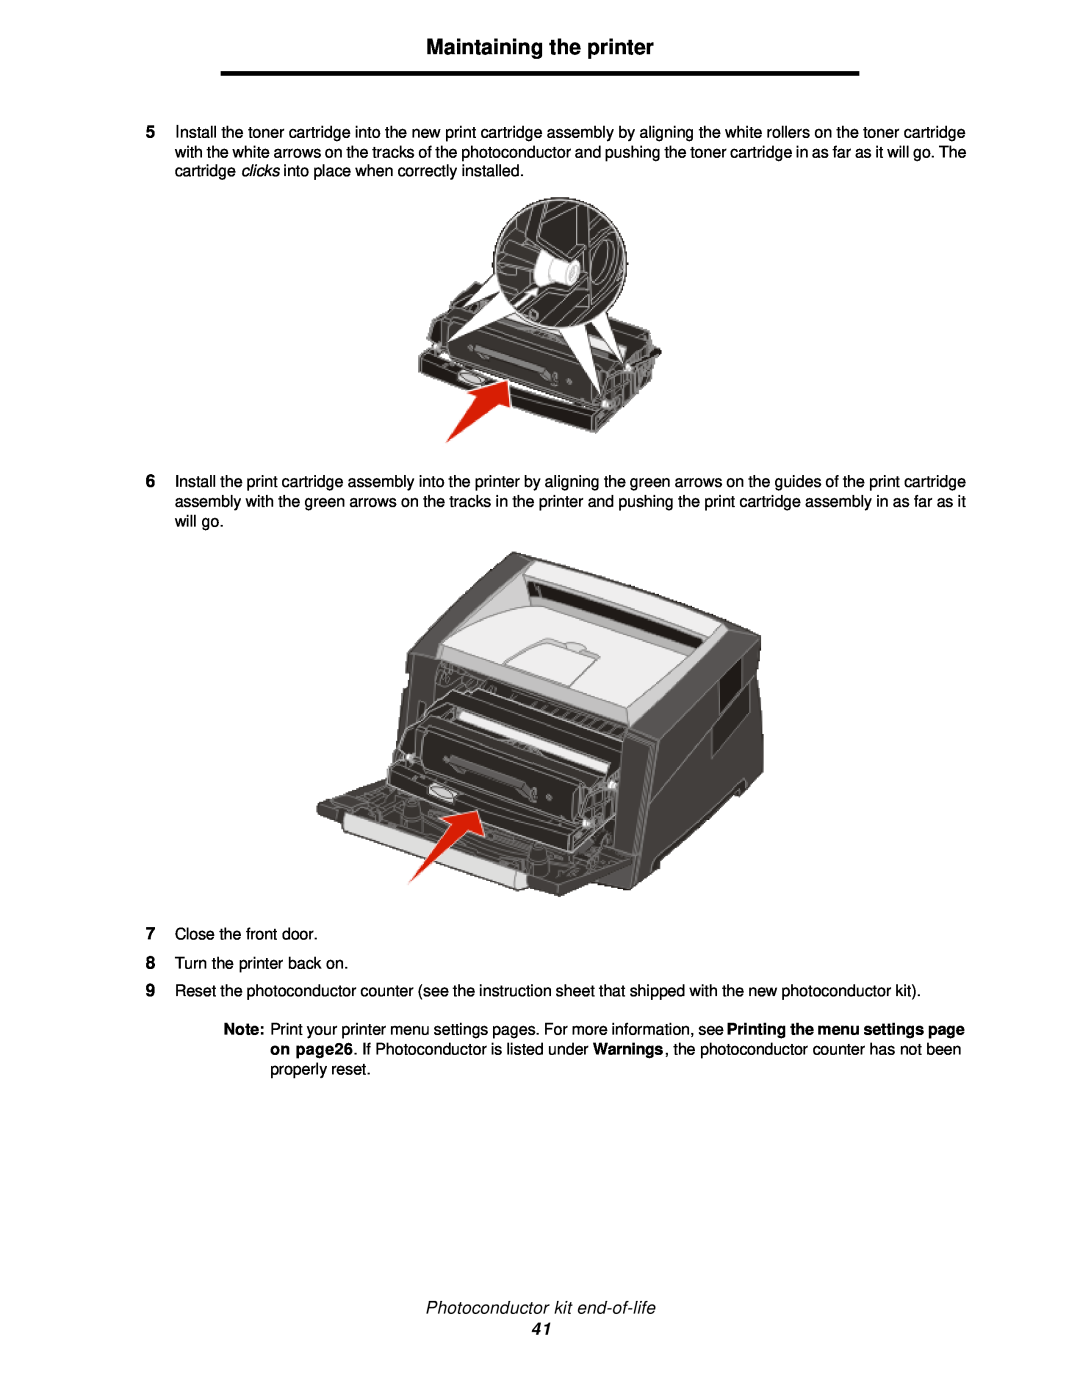 Lexmark 350d manual Maintaining the printer, Photoconductor kit end-of-life 